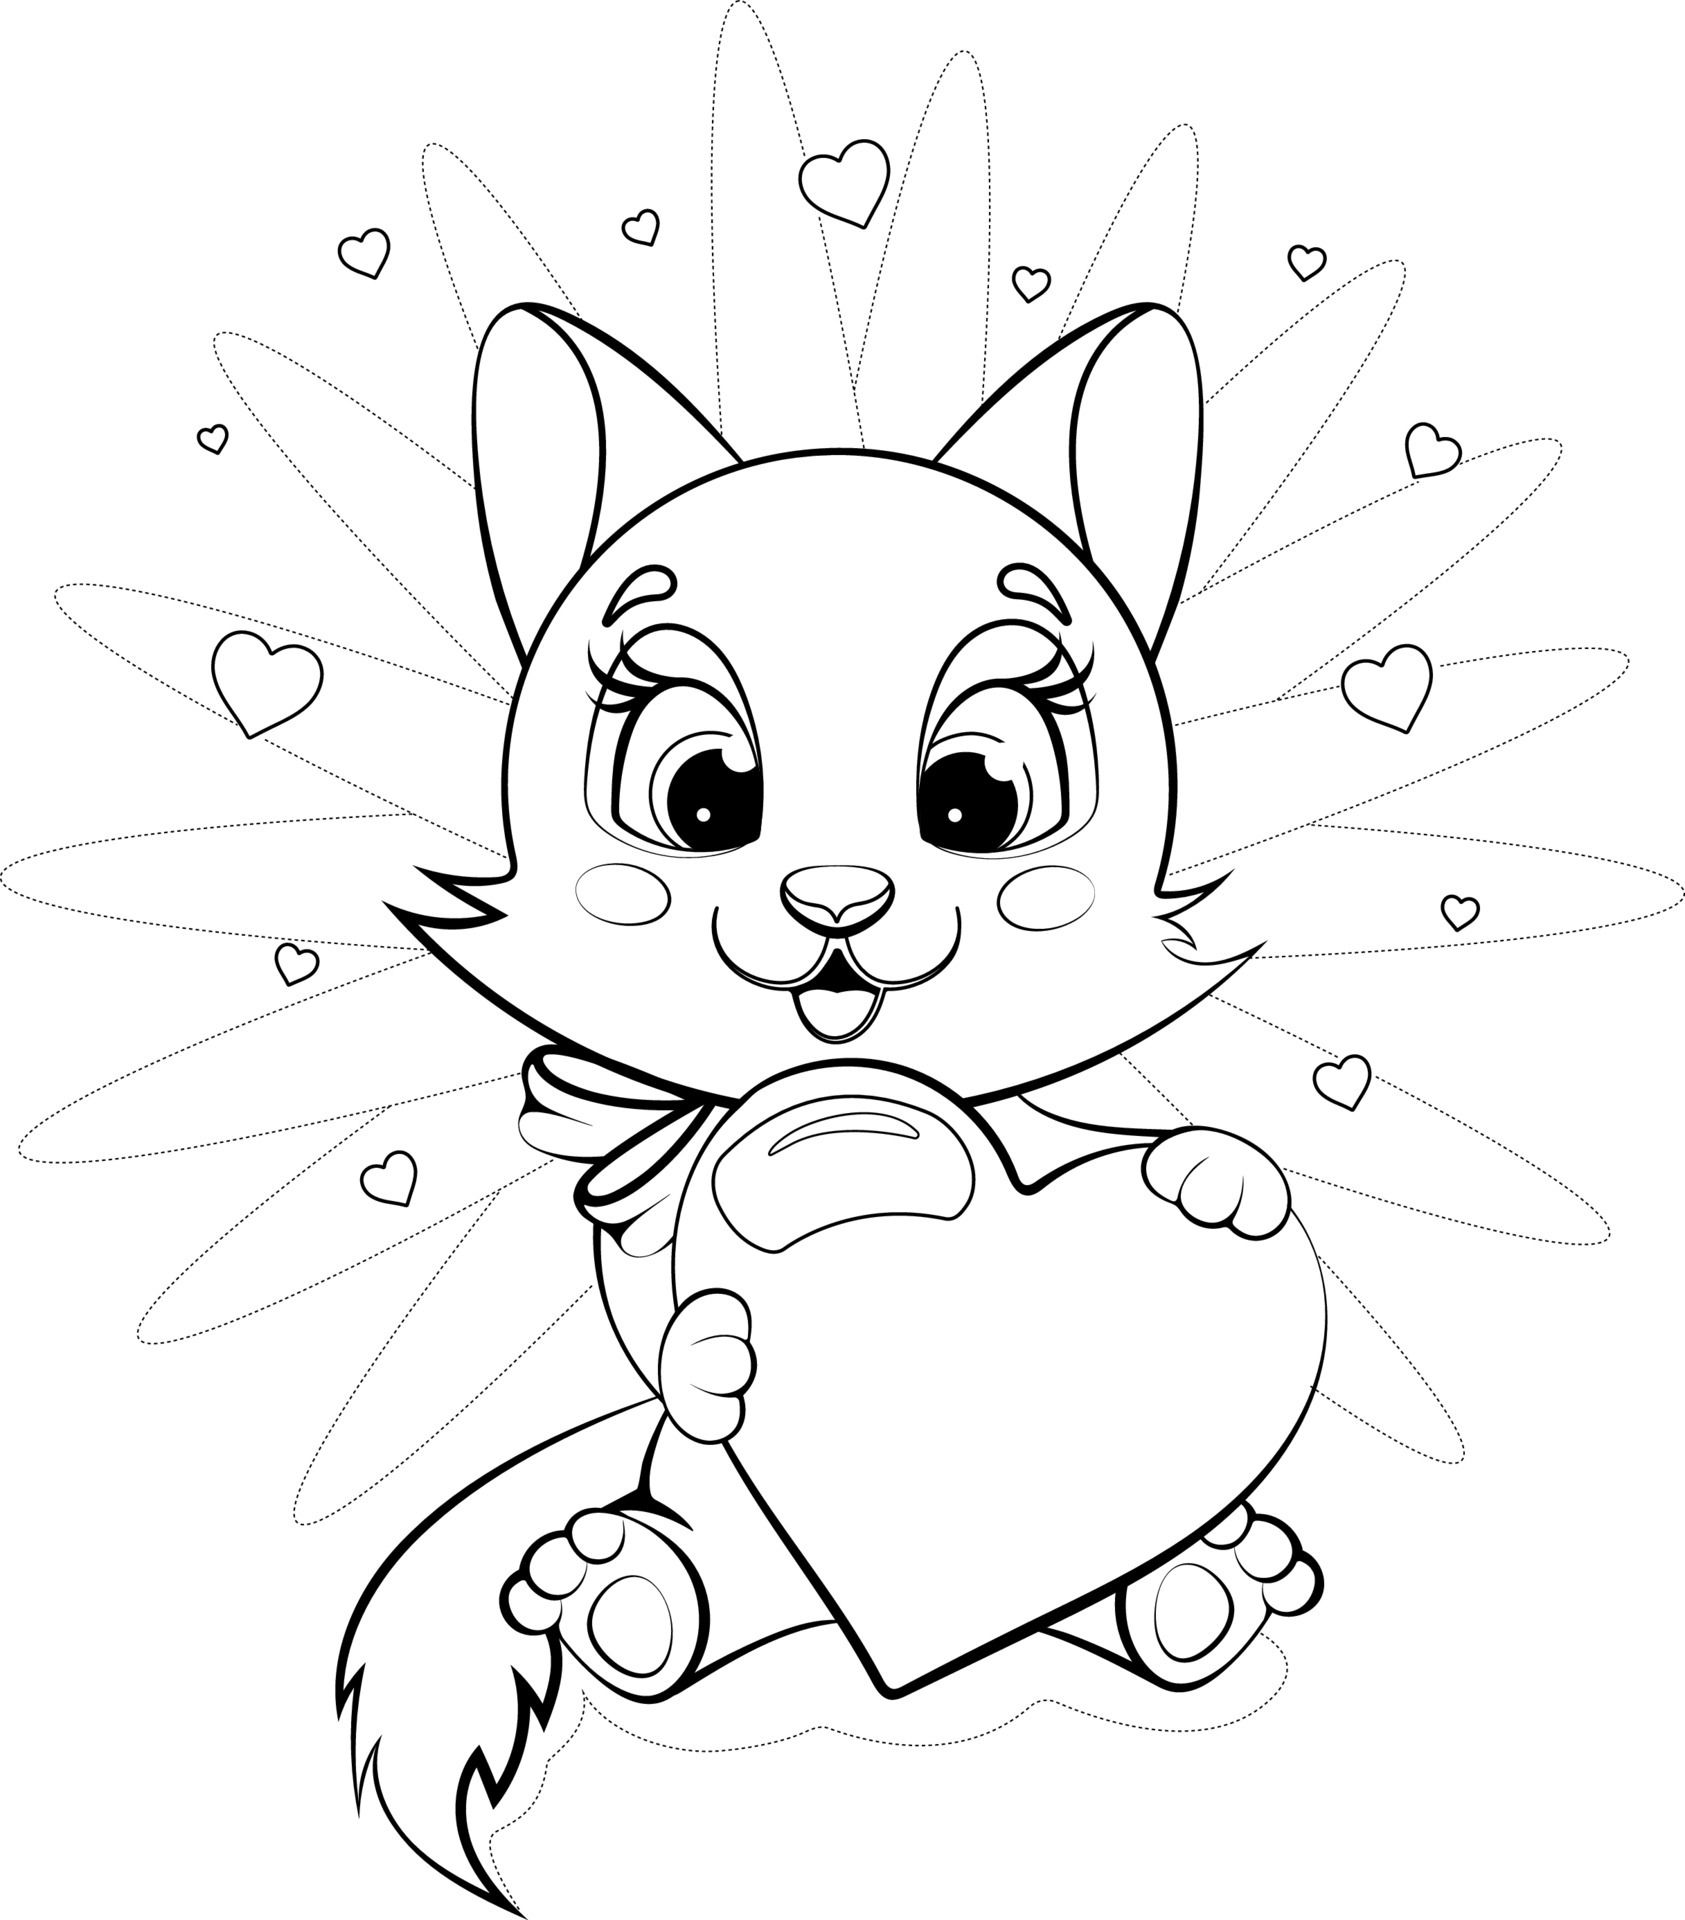 Coloring page. Cartoon cute and cheerful kitty sits and holds a heart ...